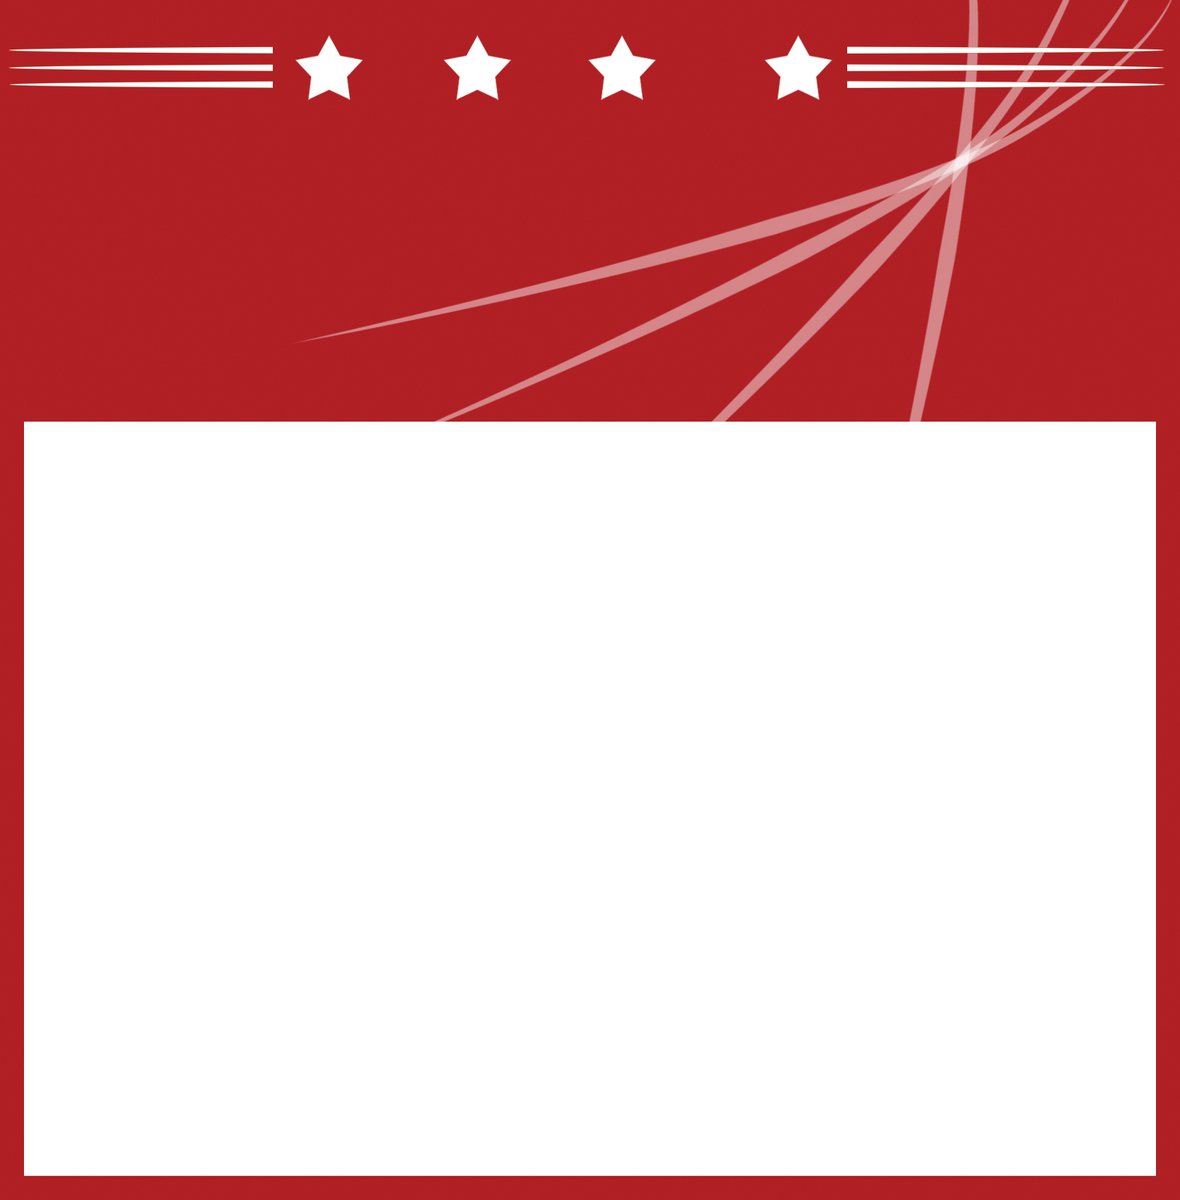 a red frame that has five stars and lines